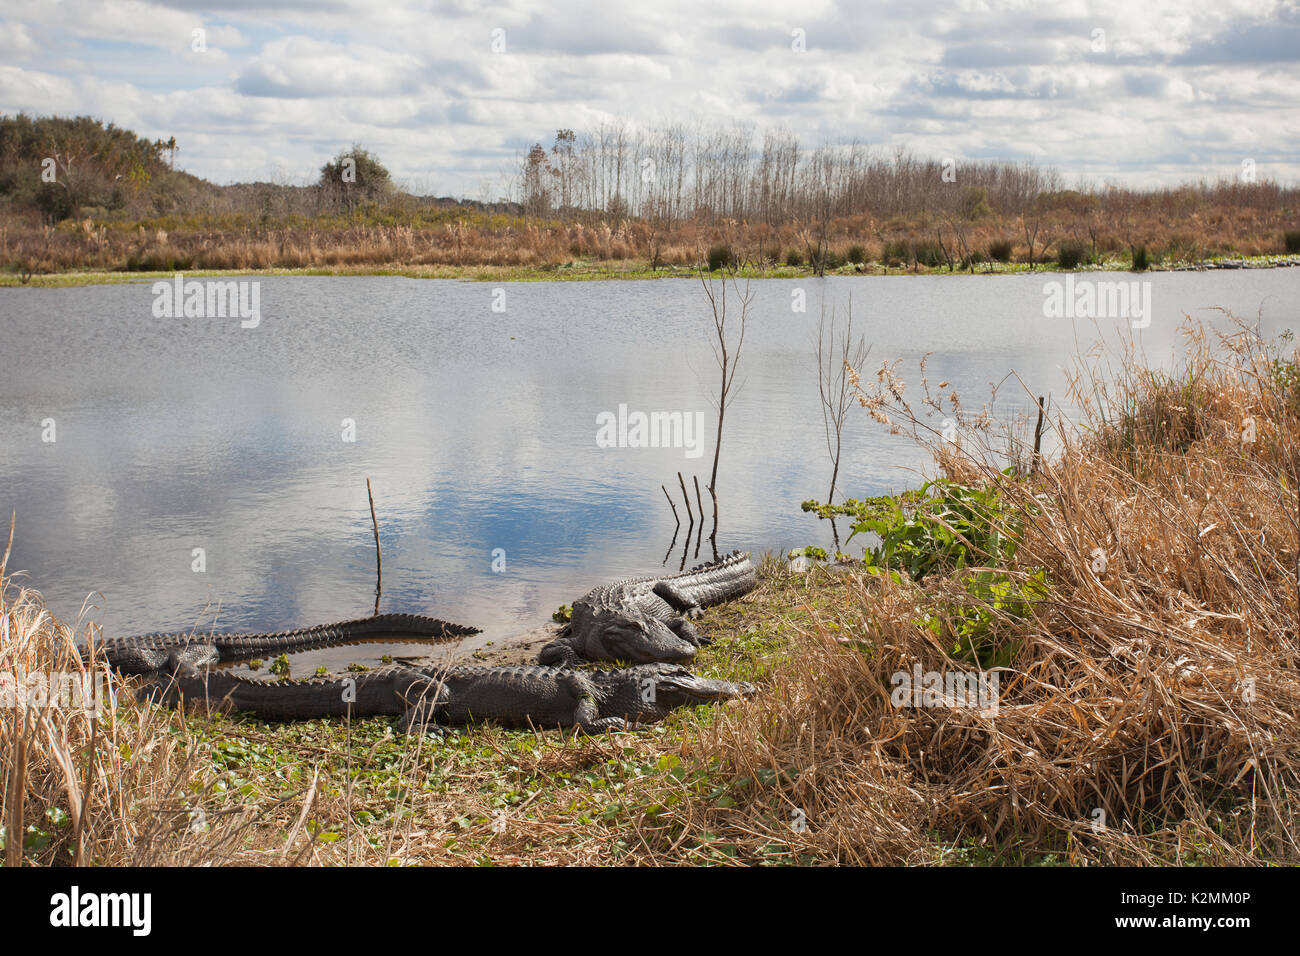 American Alligator(s) basking in the sun at Paynes Prairie Preserve State Park, Florida. Stock Photo